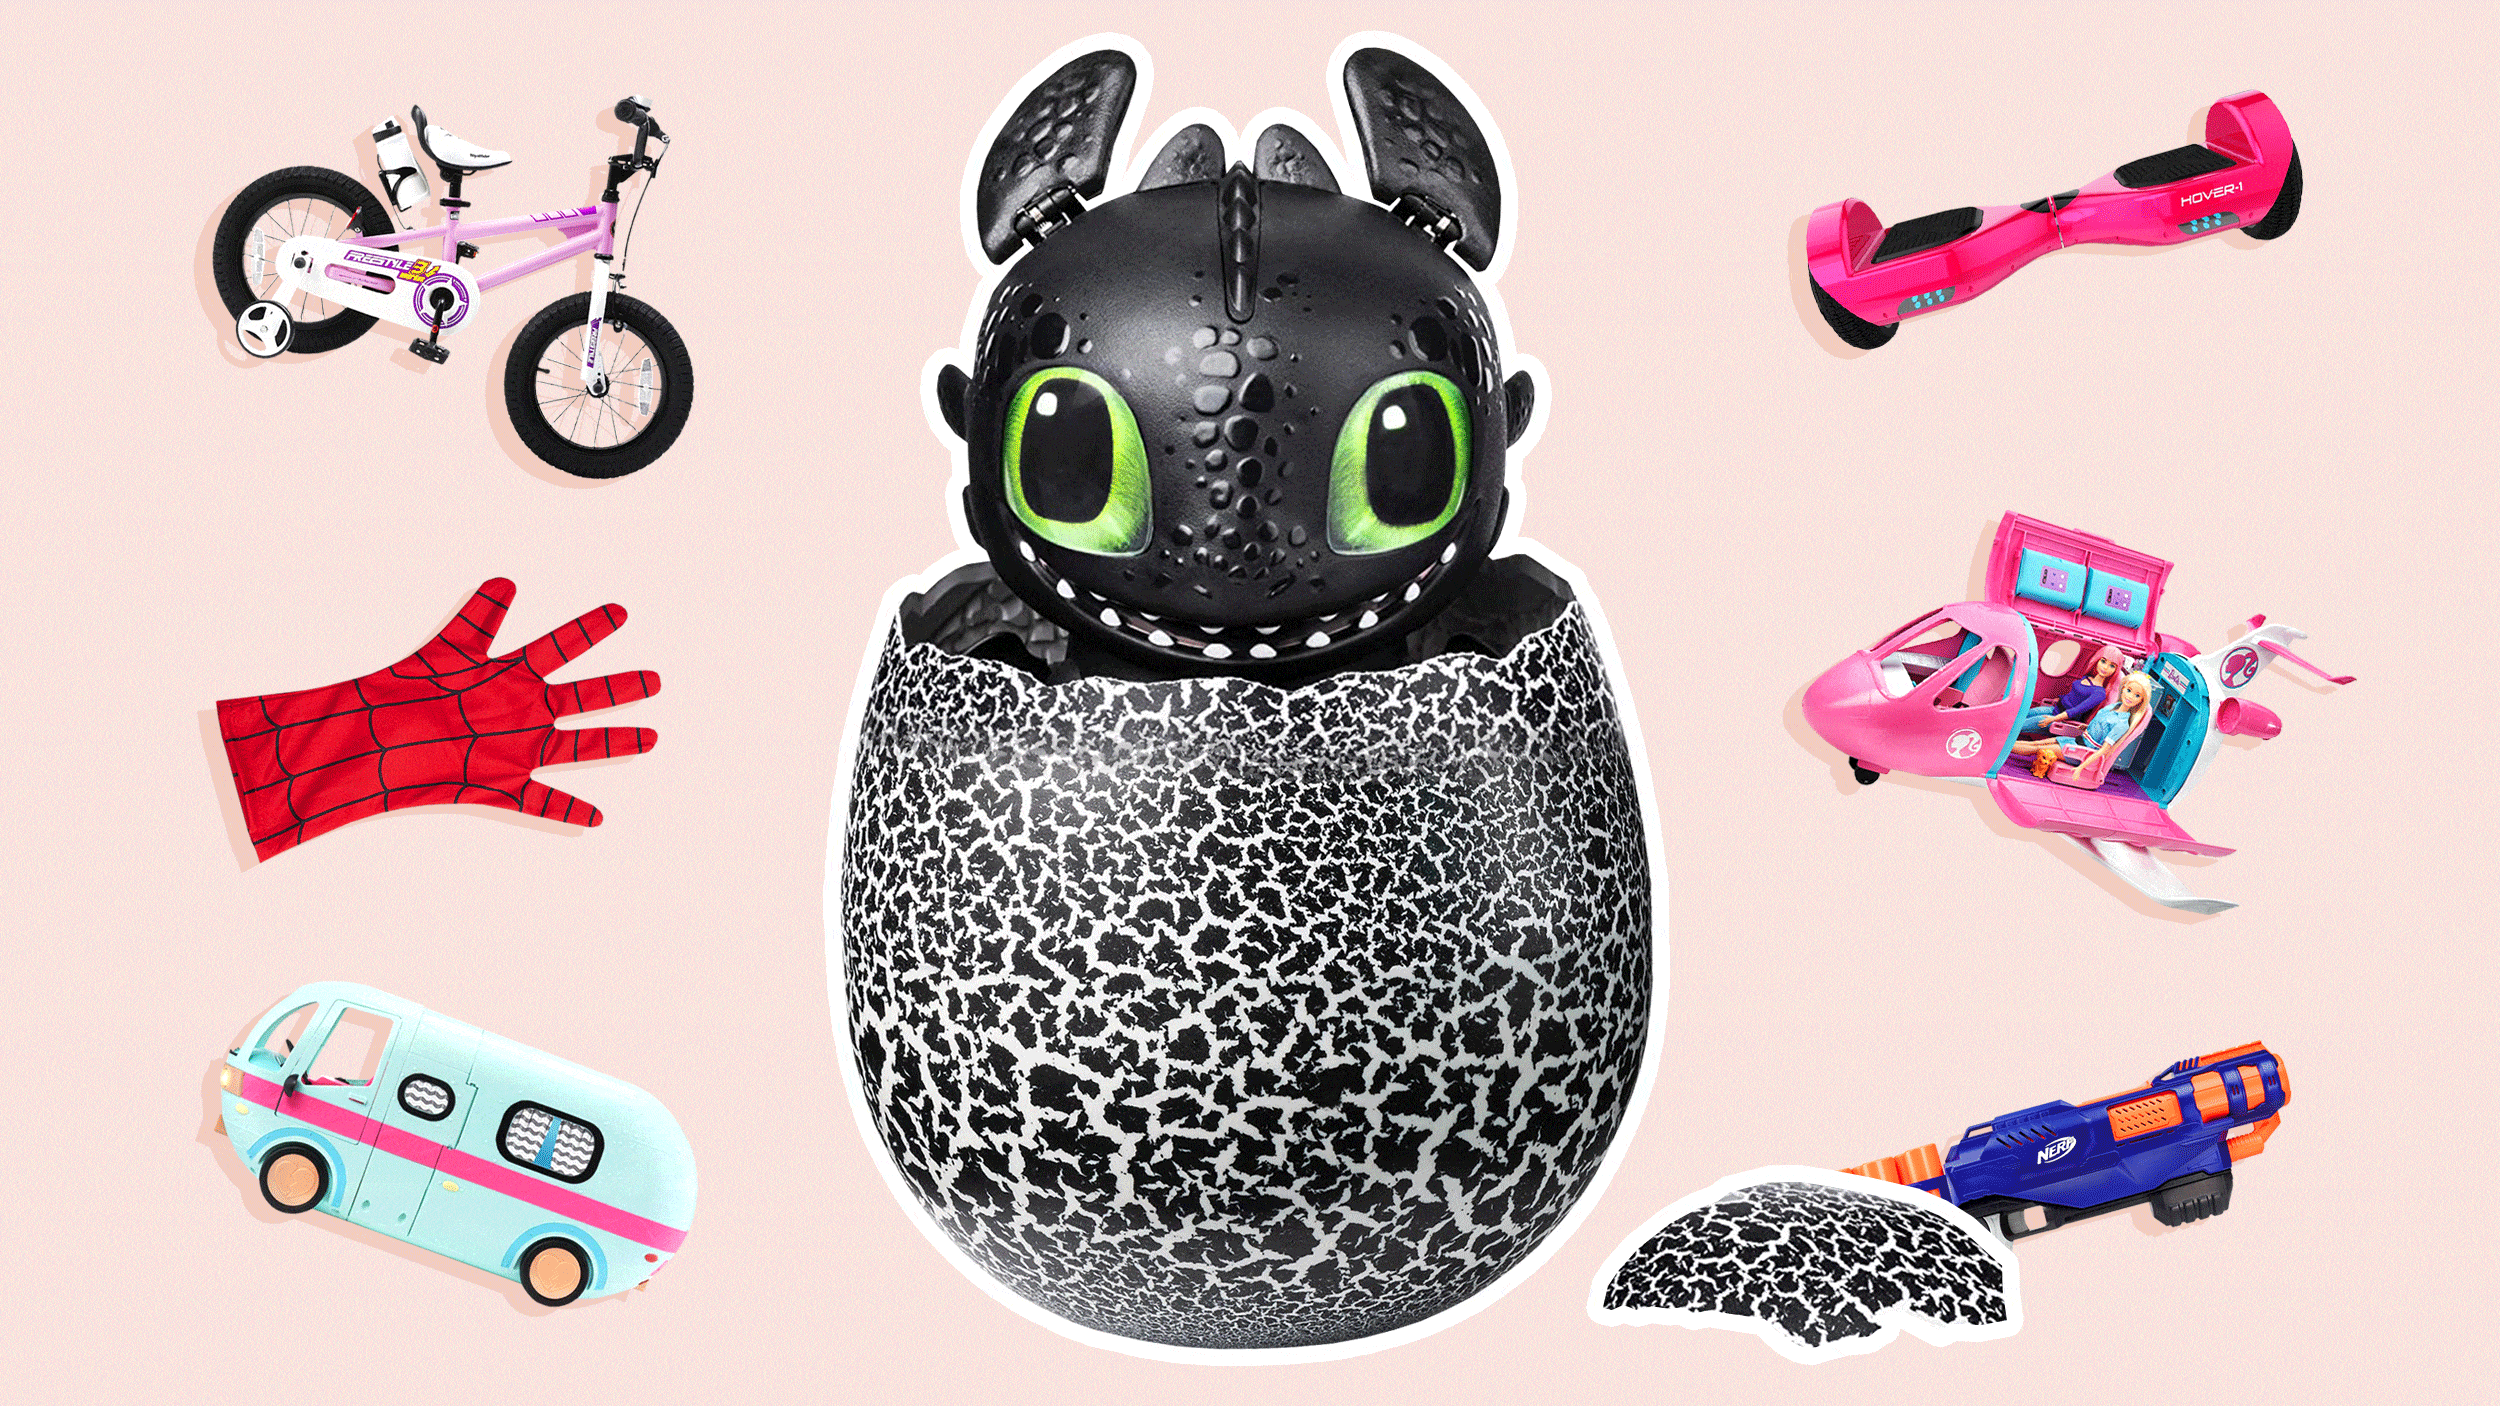 The Top Trending Toys of 2019, According to Kids